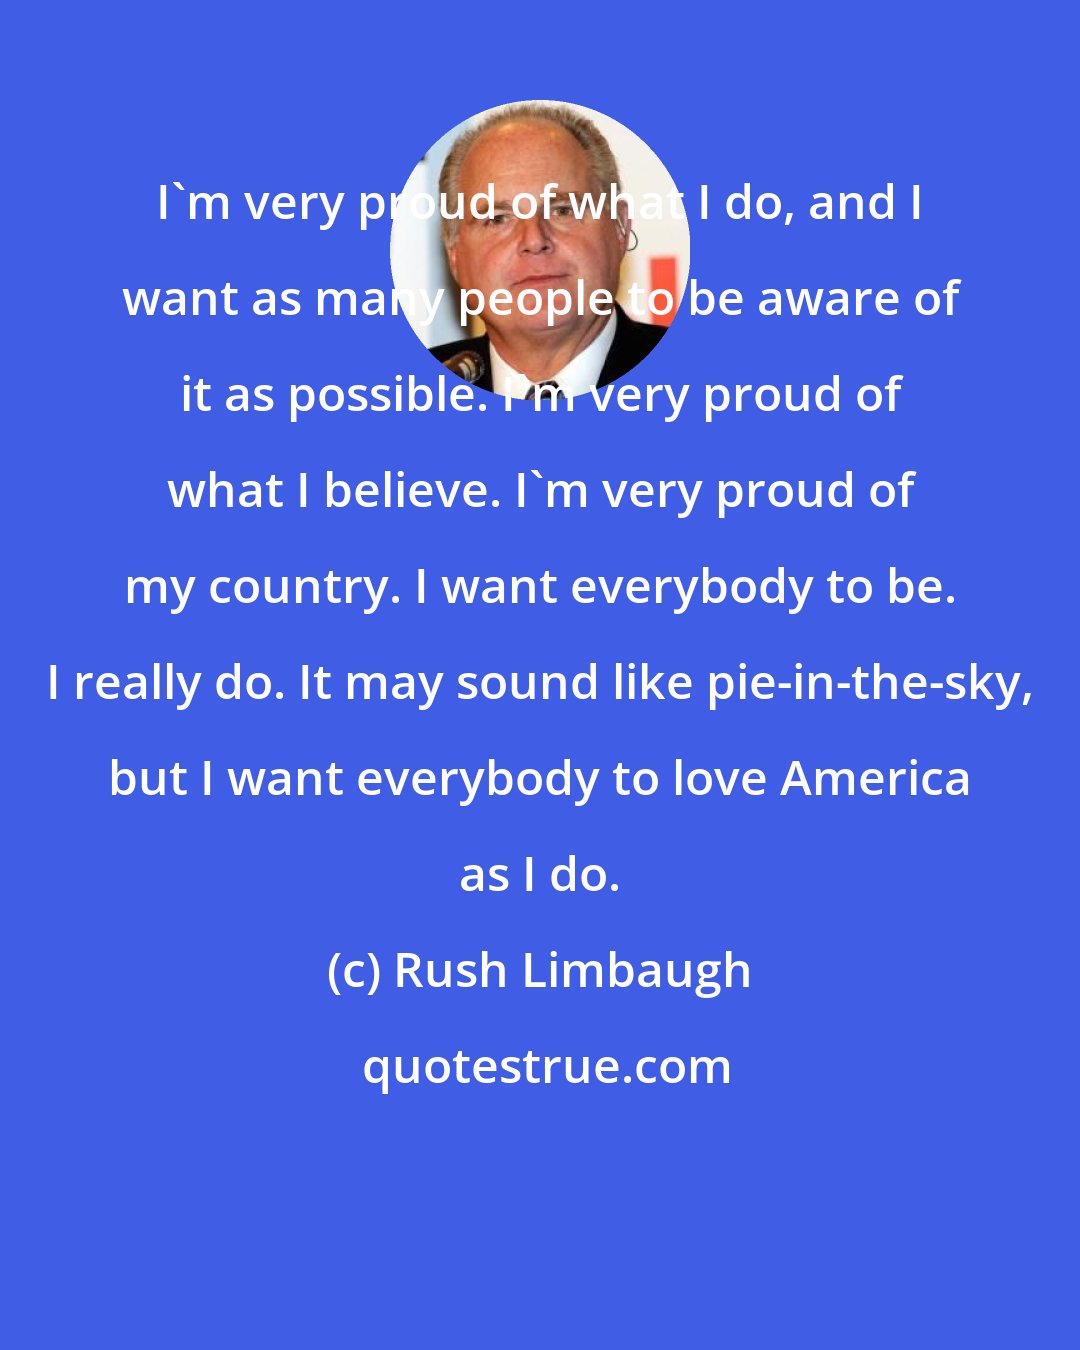 Rush Limbaugh: I'm very proud of what I do, and I want as many people to be aware of it as possible. I'm very proud of what I believe. I'm very proud of my country. I want everybody to be. I really do. It may sound like pie-in-the-sky, but I want everybody to love America as I do.